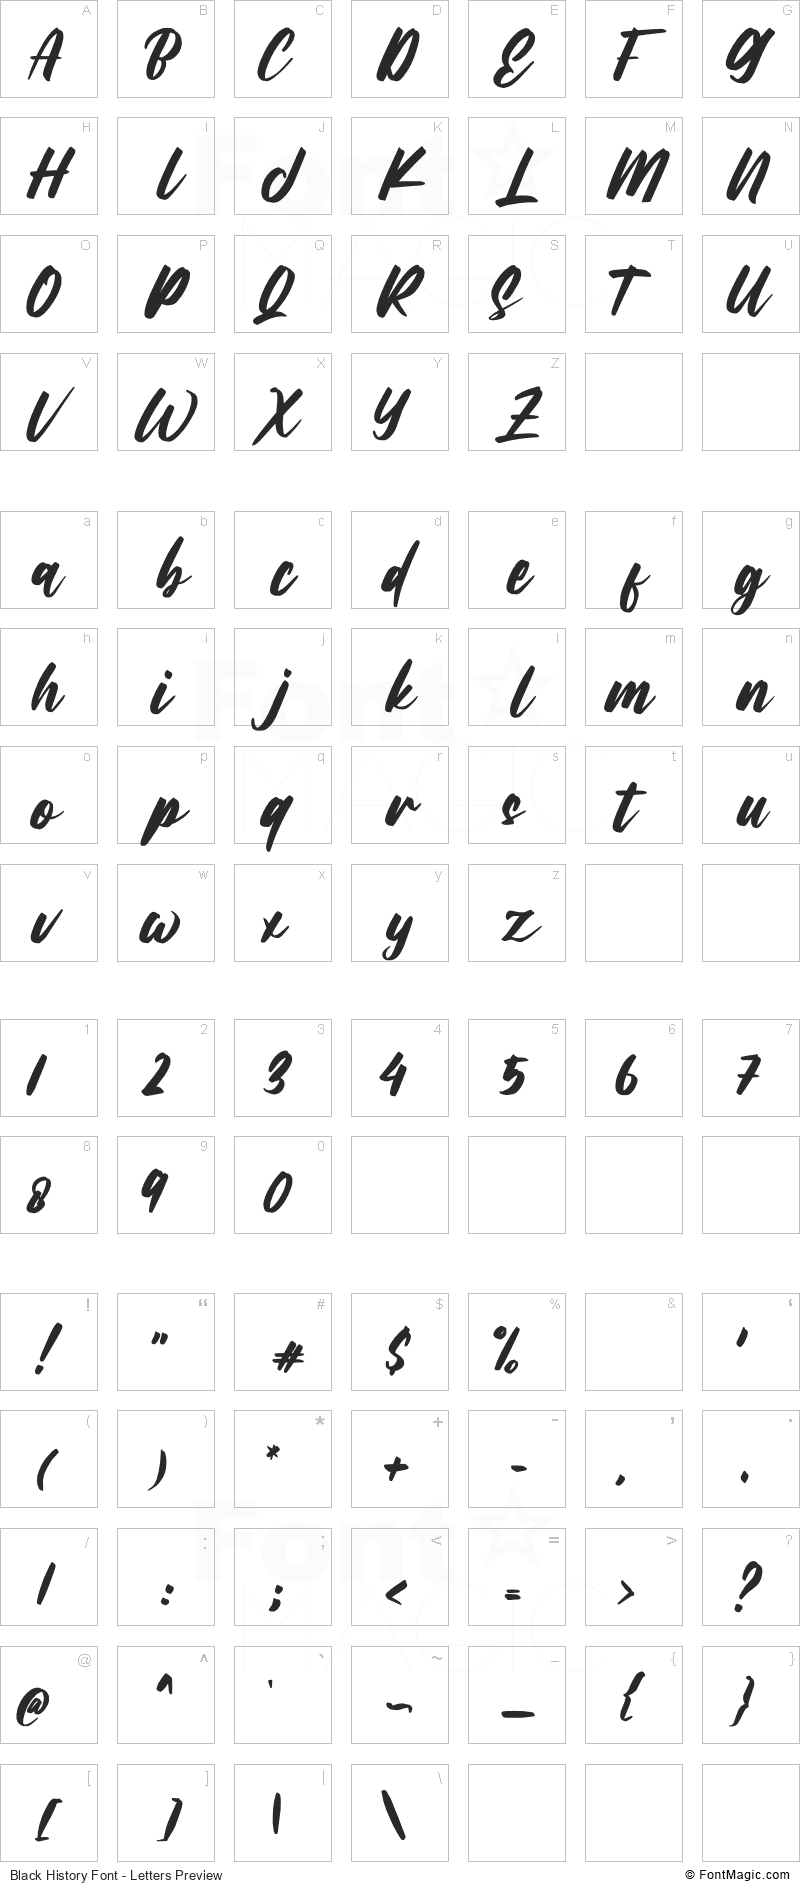 Black History Font - All Latters Preview Chart